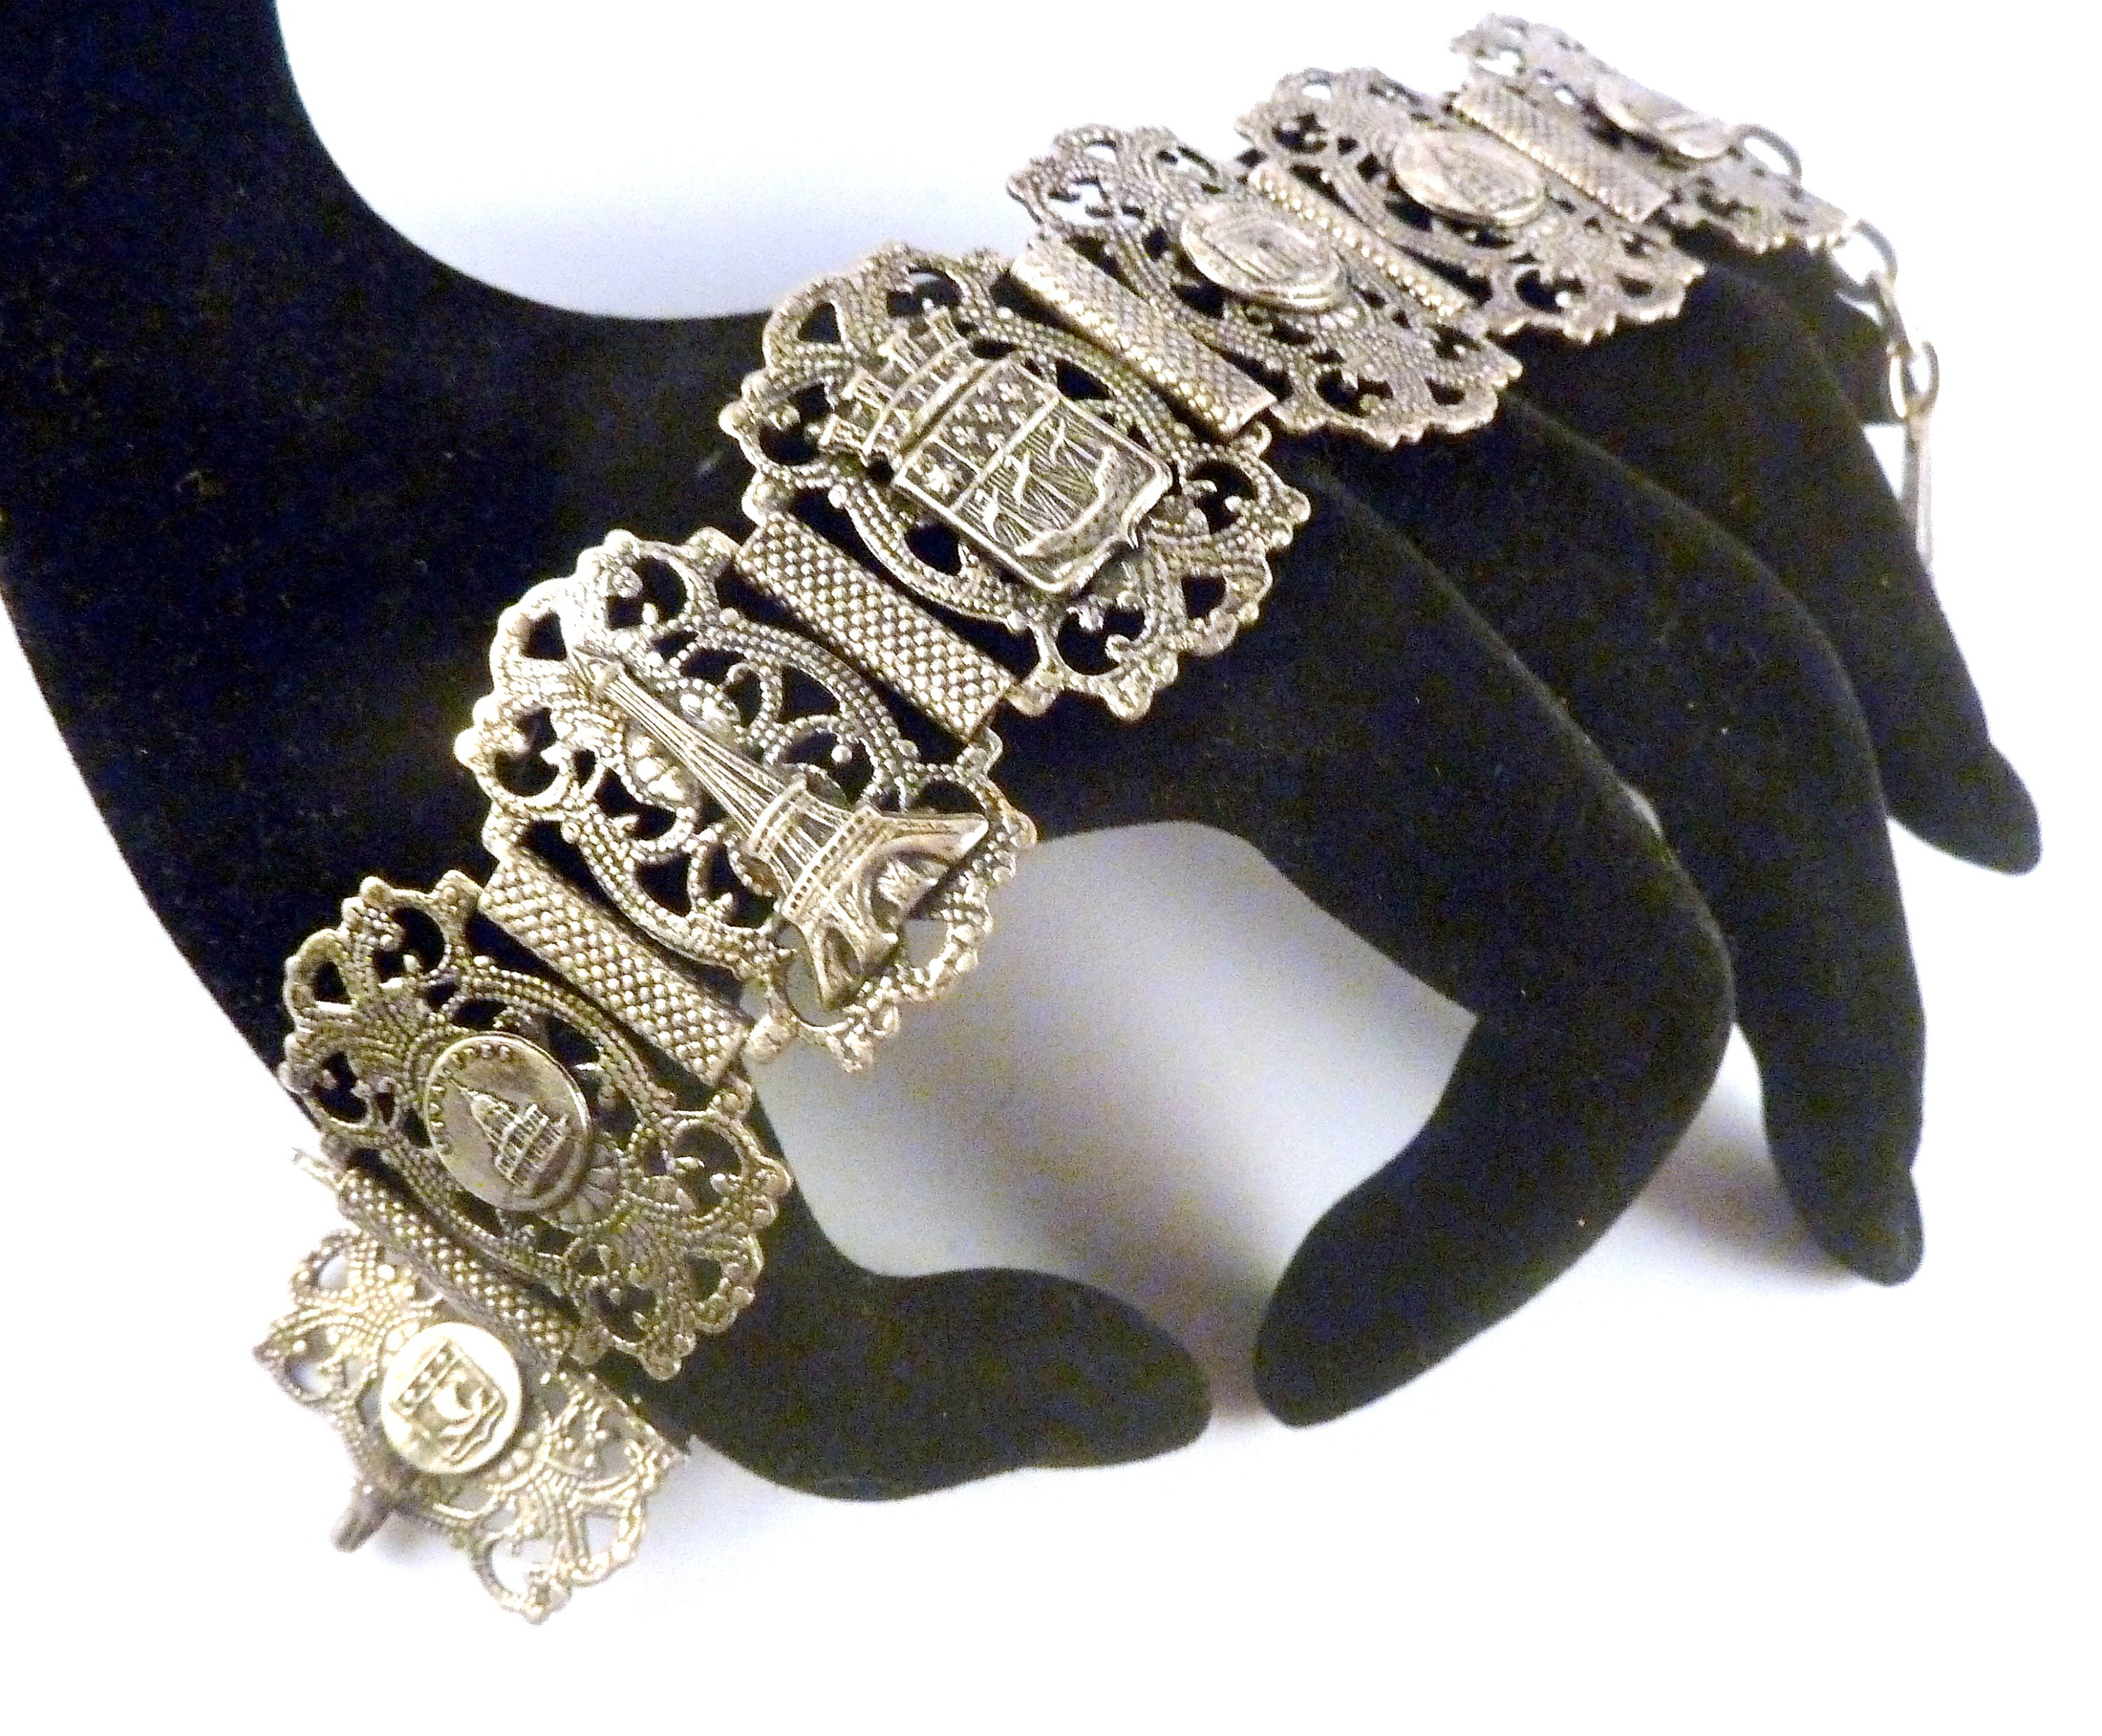 Western Art Deco Cuff - Mad Private by The French Guy - Bracelets